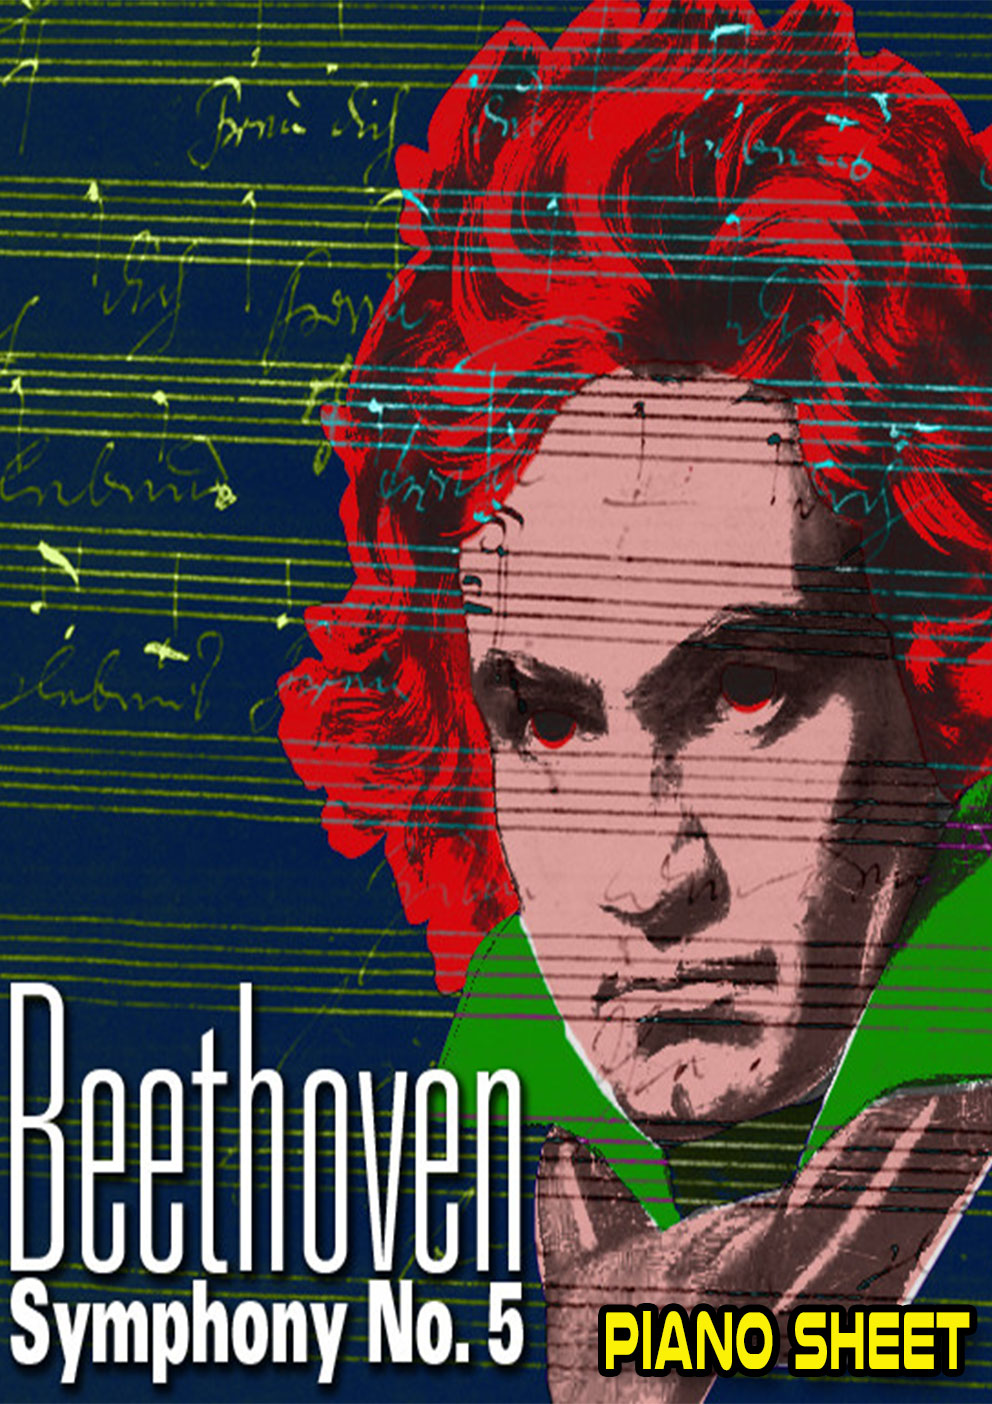 Beethoven, Symphony No.5 in C Minor Cover